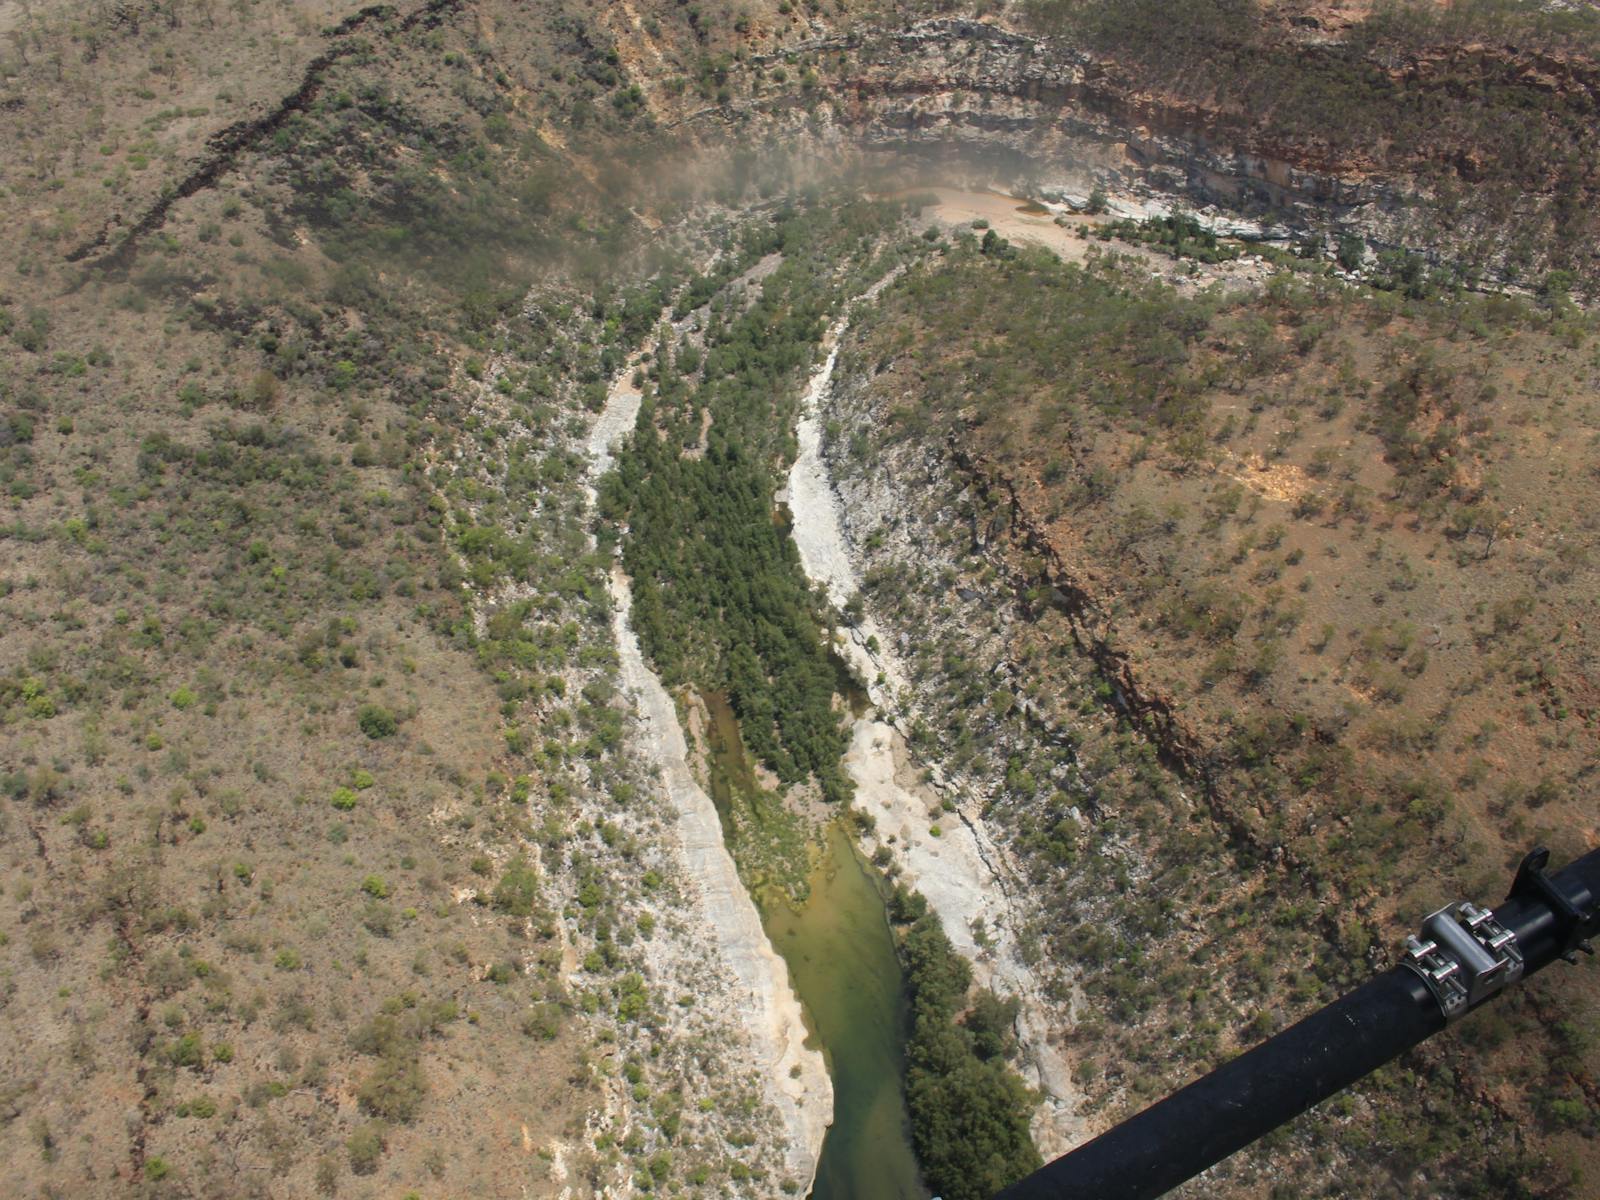 Looking down from the helicopter into Porcupine Gorge